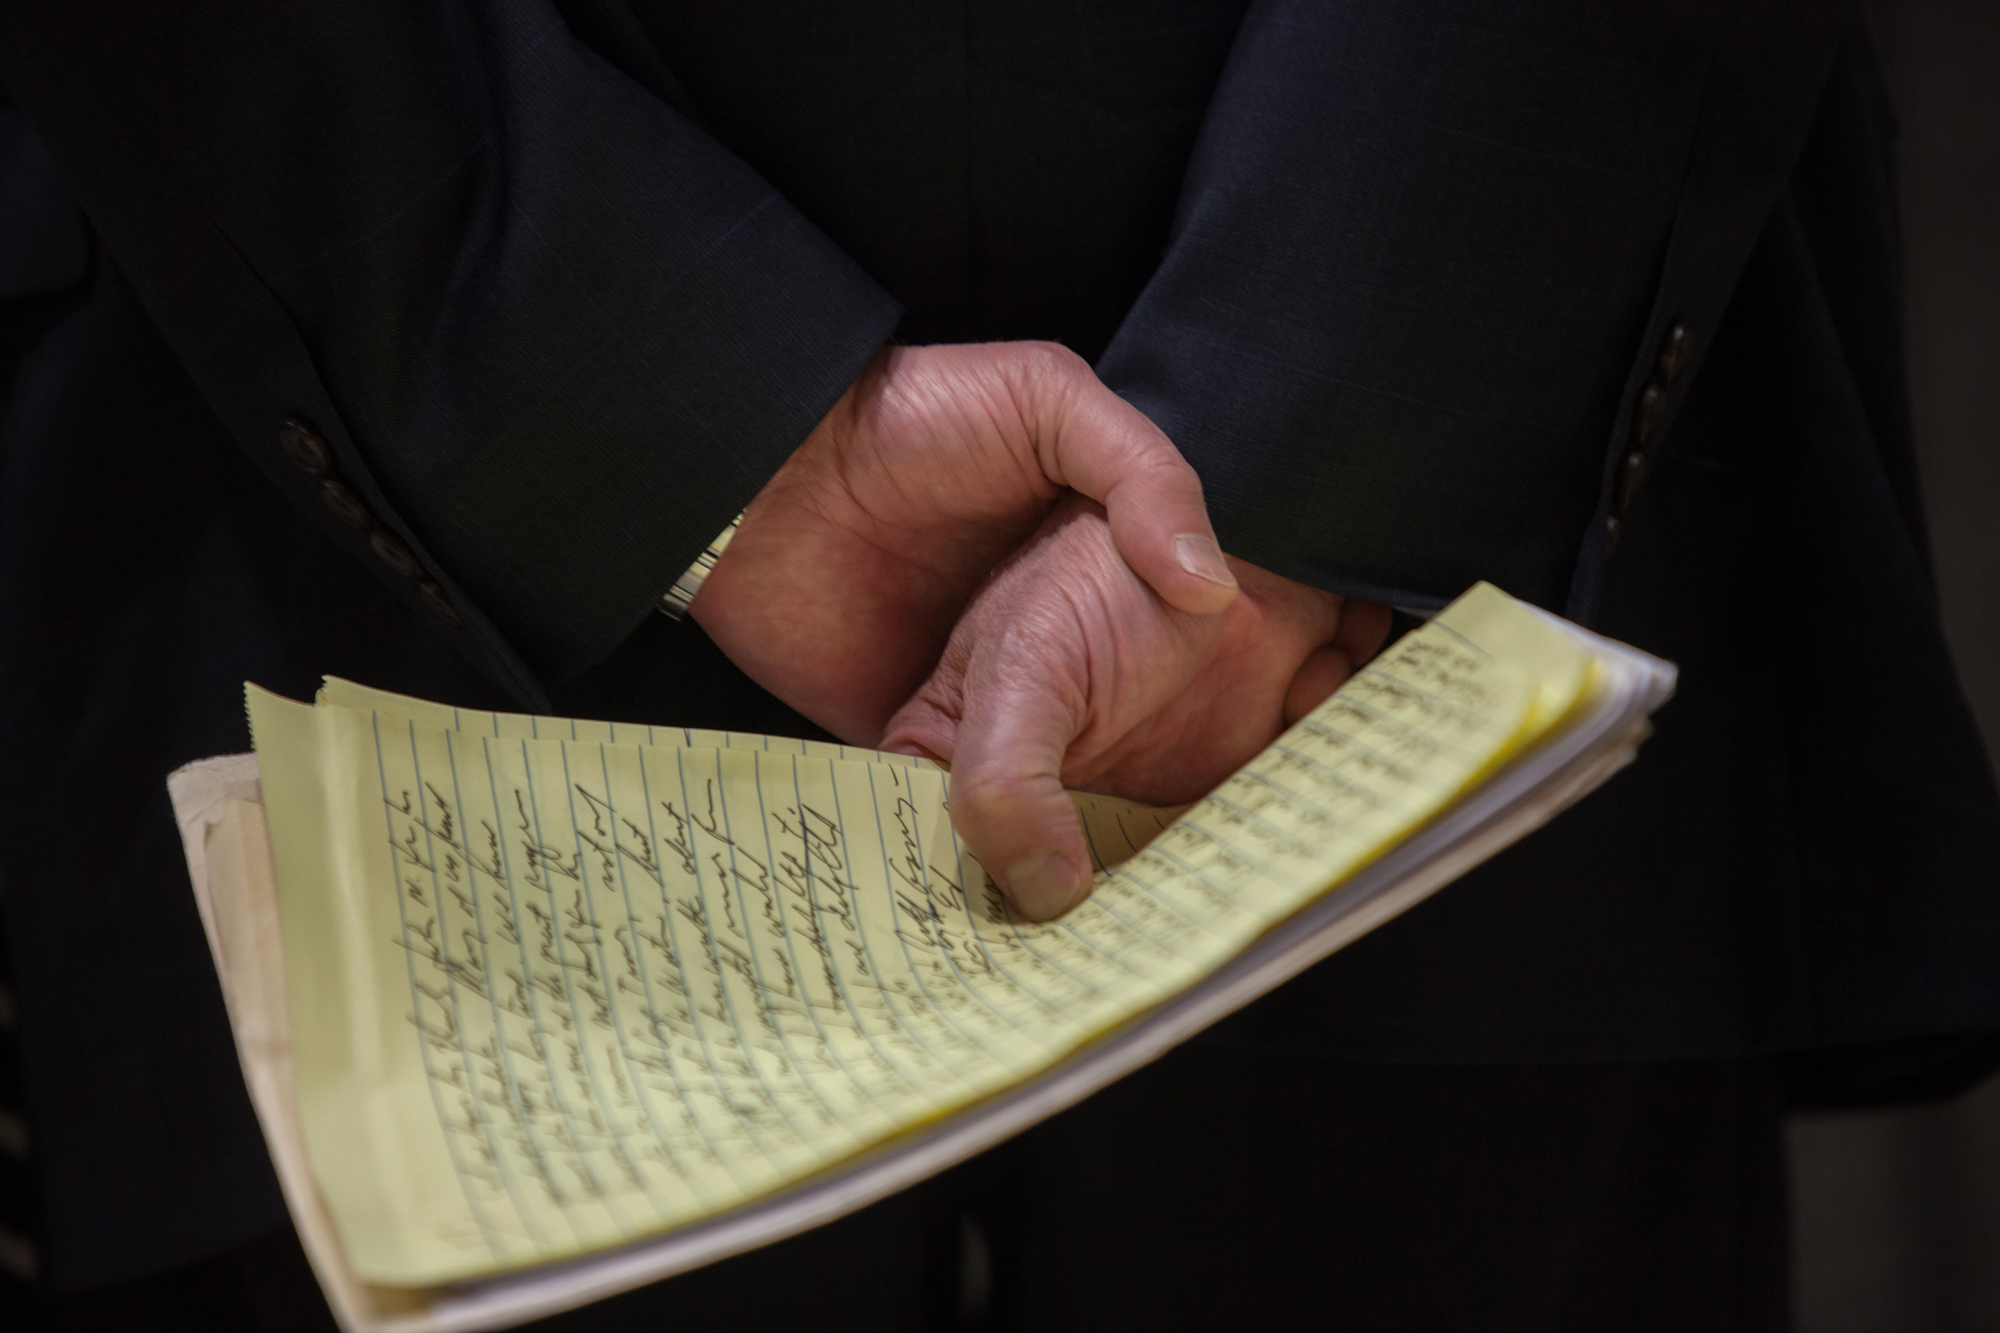 Senator Bernie Sanders holds his ubiquitous lined yellow pad, before taking the stage at the Veteran’s Memorial Coliseum in Madison, Wisconsin on July 1st, 2015.